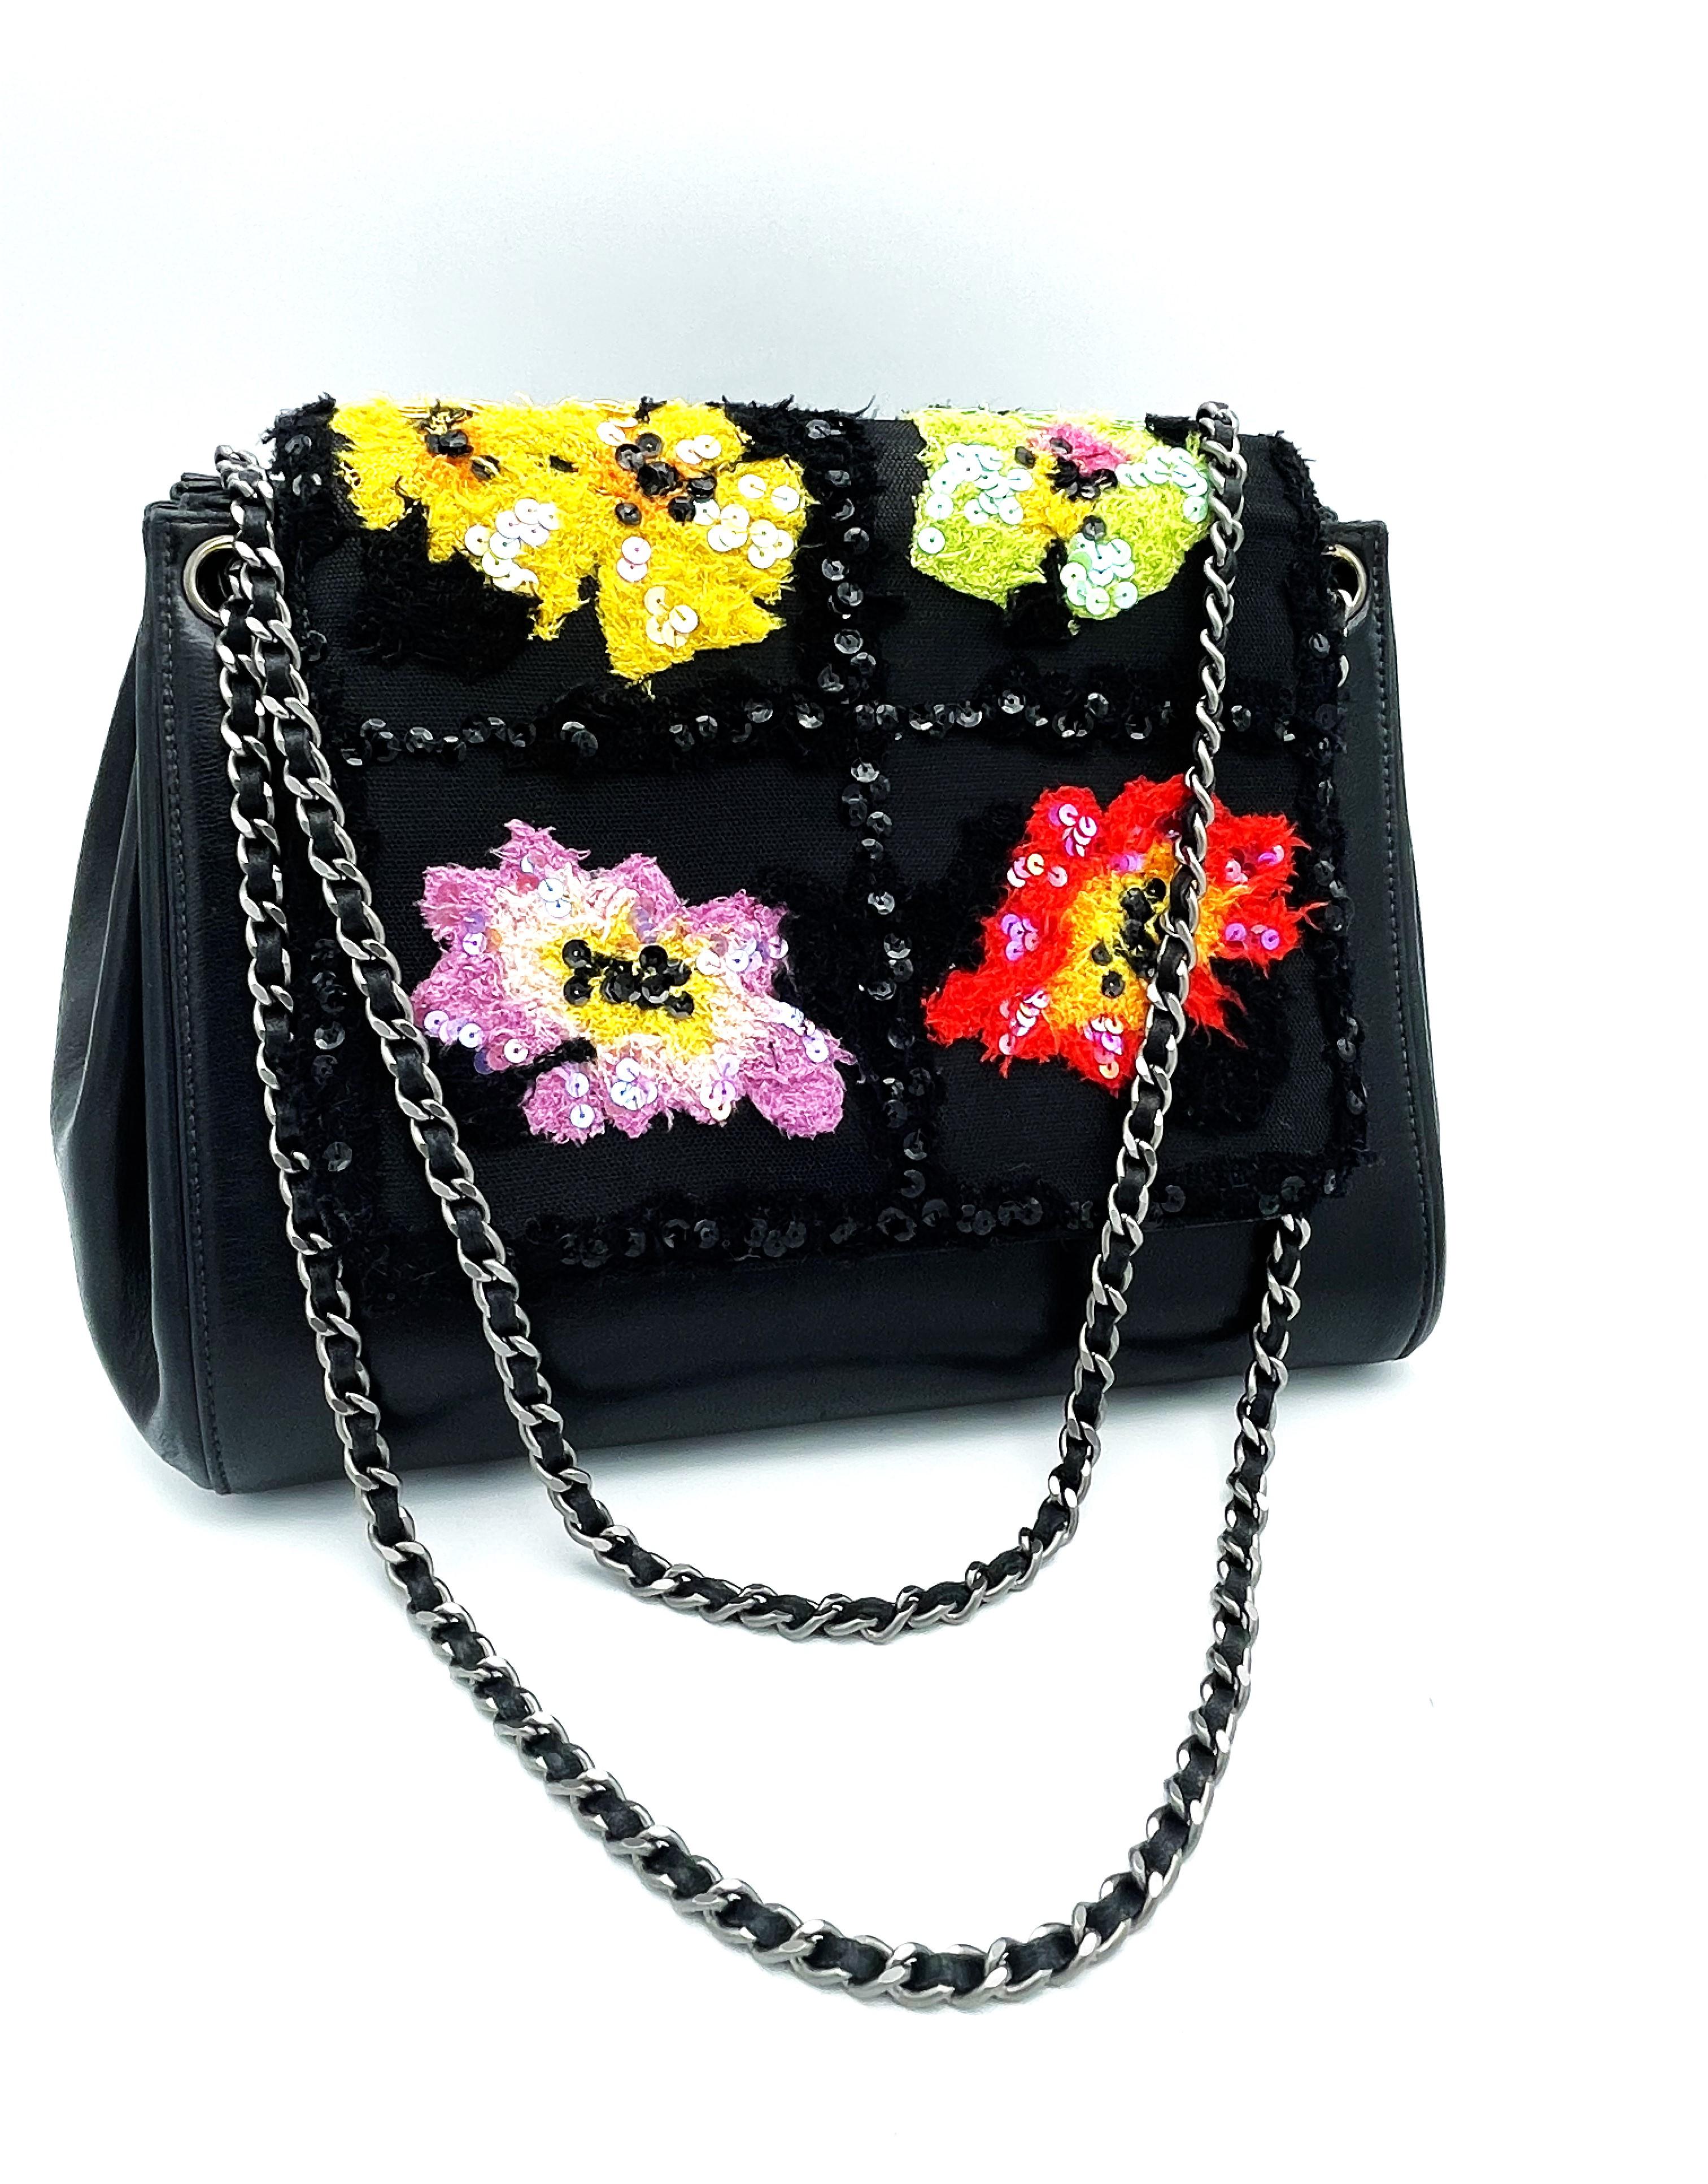 A totally extraordinary Chanel bag in the form of an accordion, which makes it very spacious and has a large opening. The cover of this bag is provided with 4 colorful fabric flowers, which are framed by black sequins, which is also the unusual